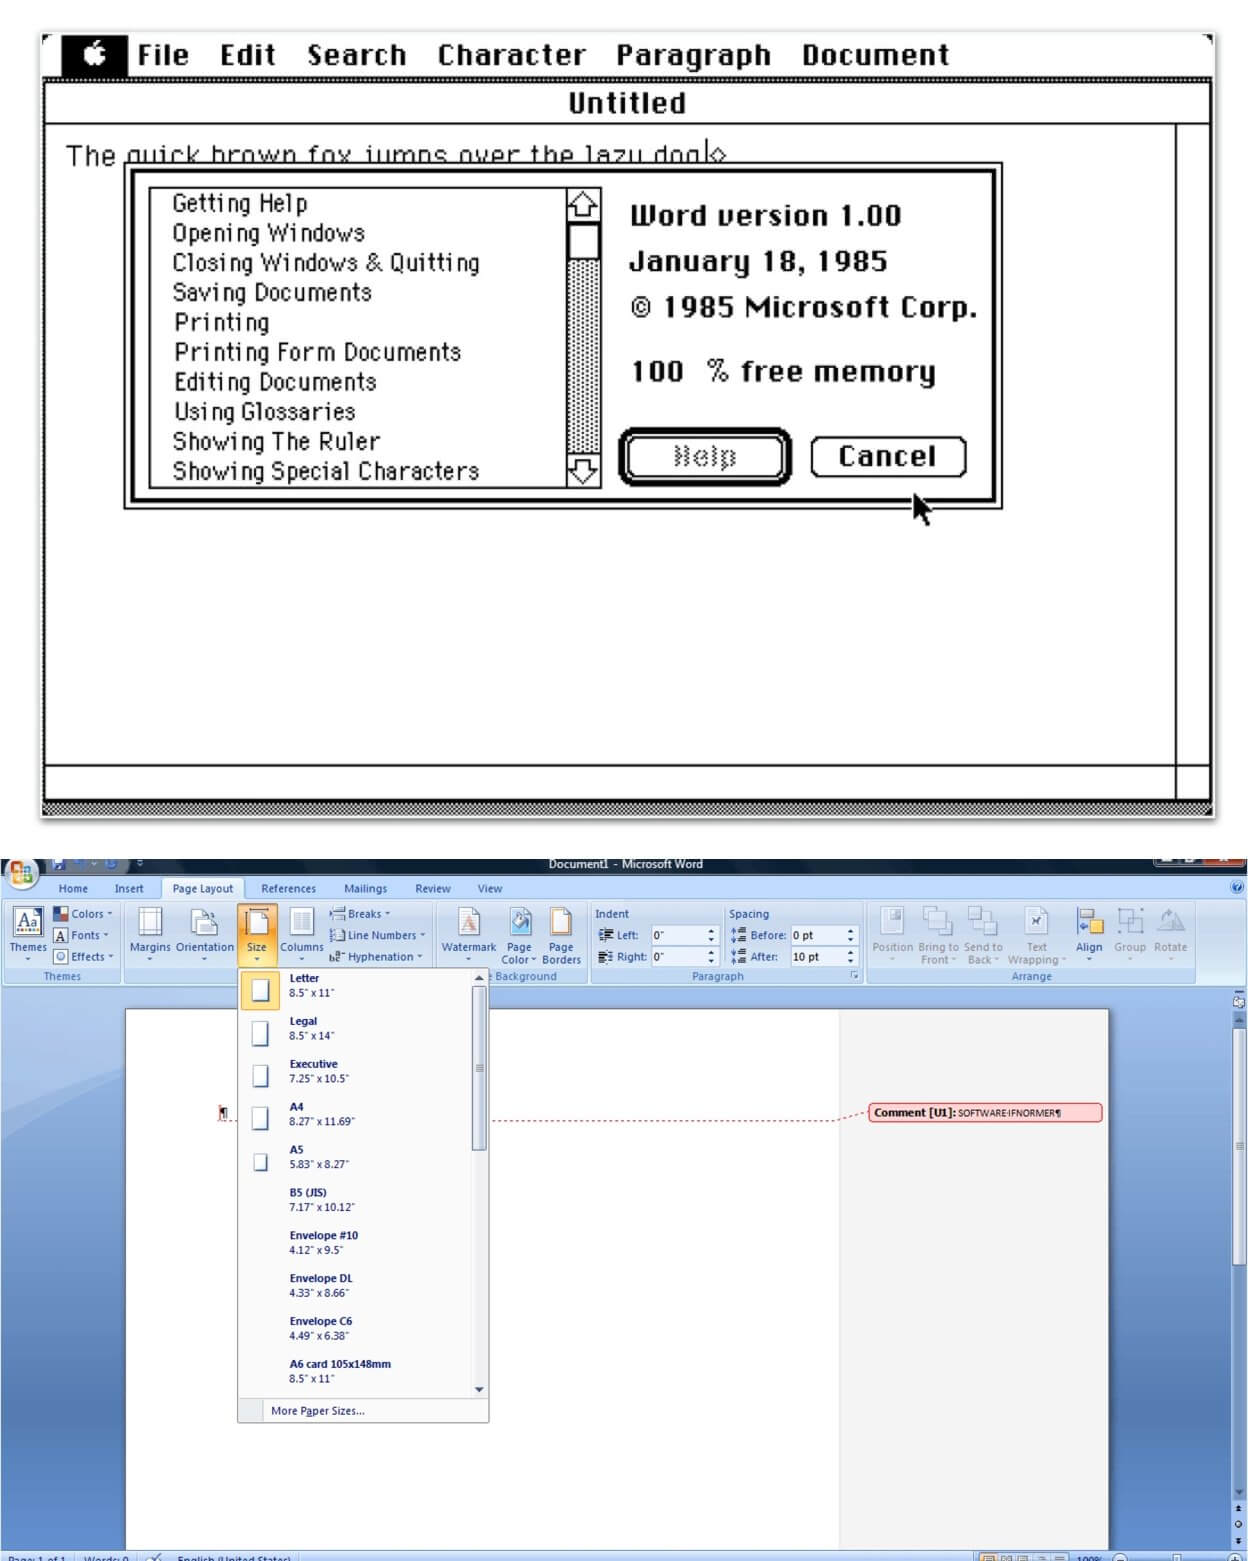 Microsoft Word's user interface when it launched and how it looks today